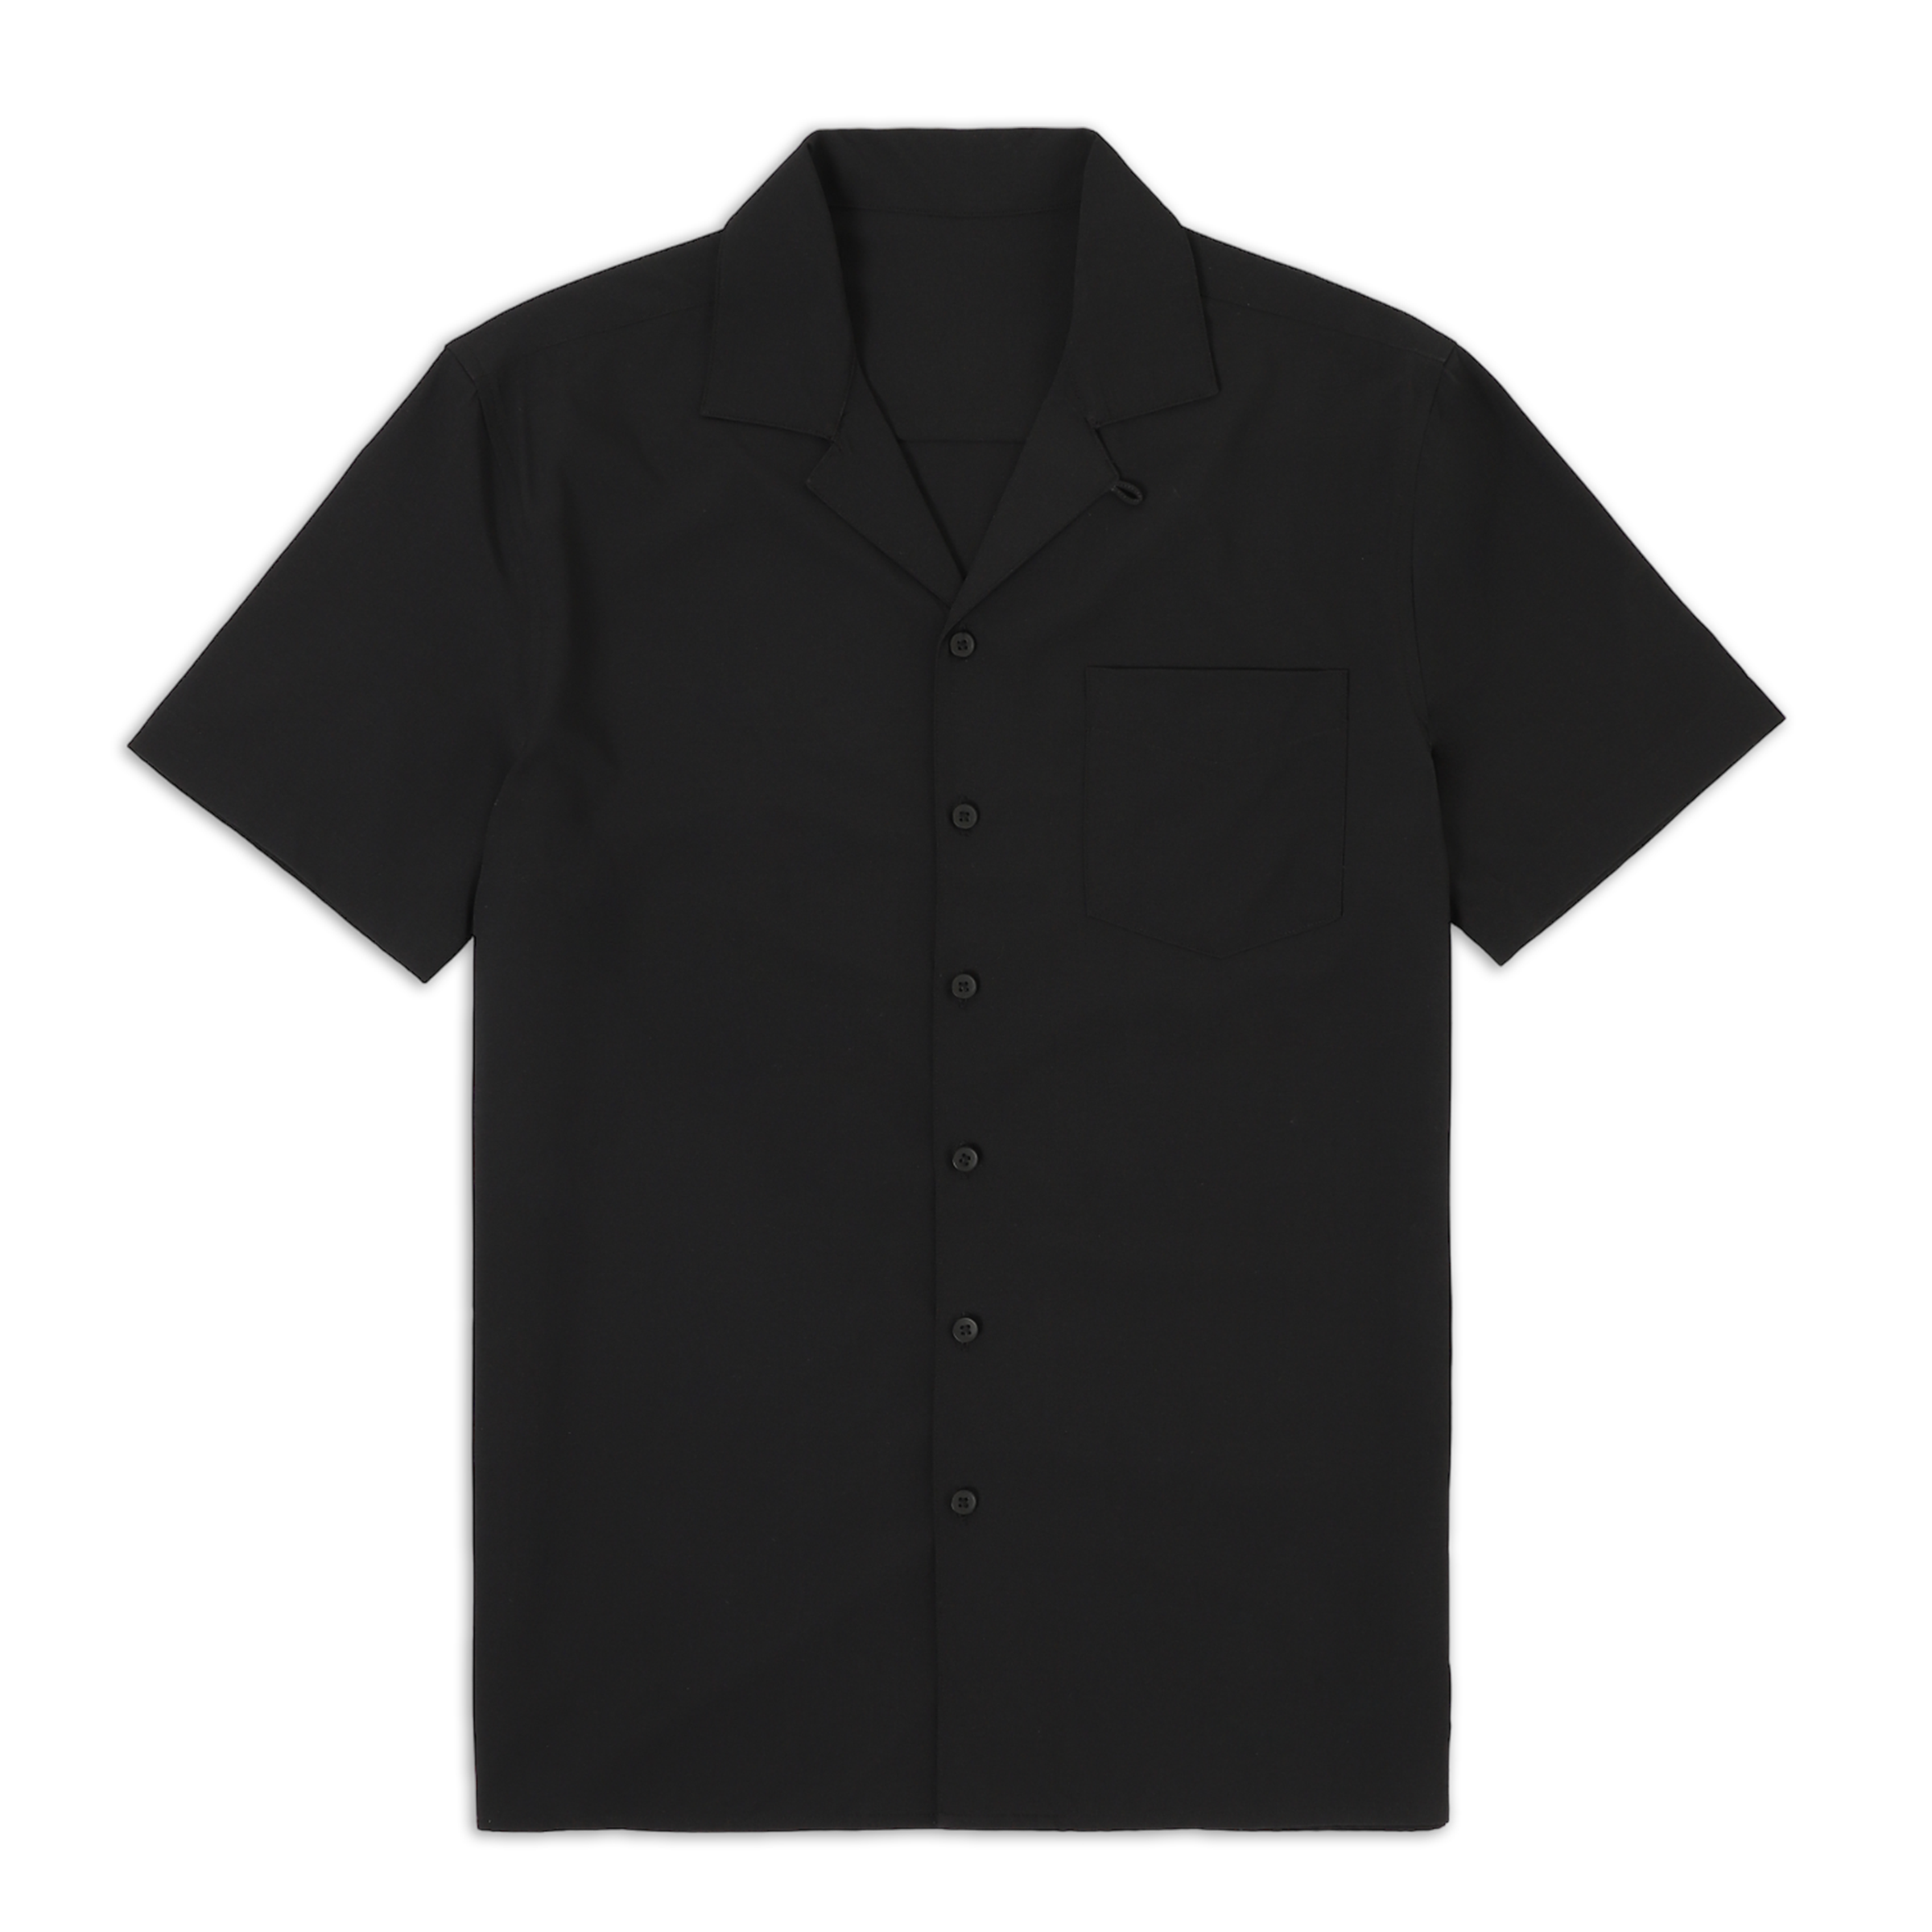 Cabana Camp Collar Shirt Black  front with camp collar, patch pocket on left chest, black buttons, and short sleeves